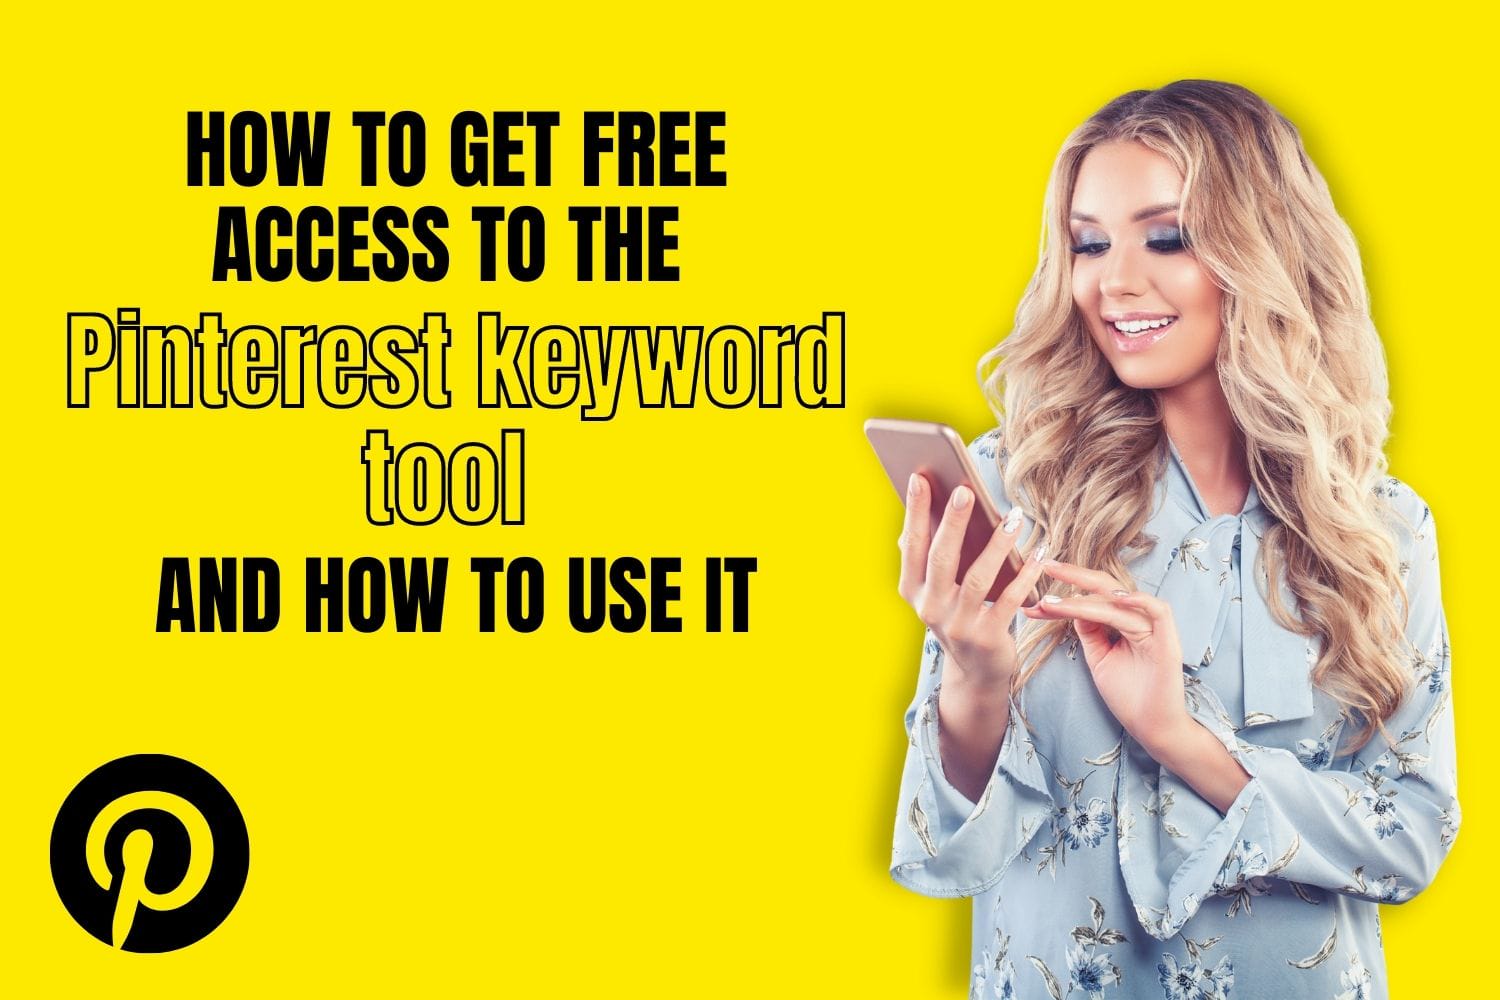 How to get free access to the Pinterest keyword tool and how to use it